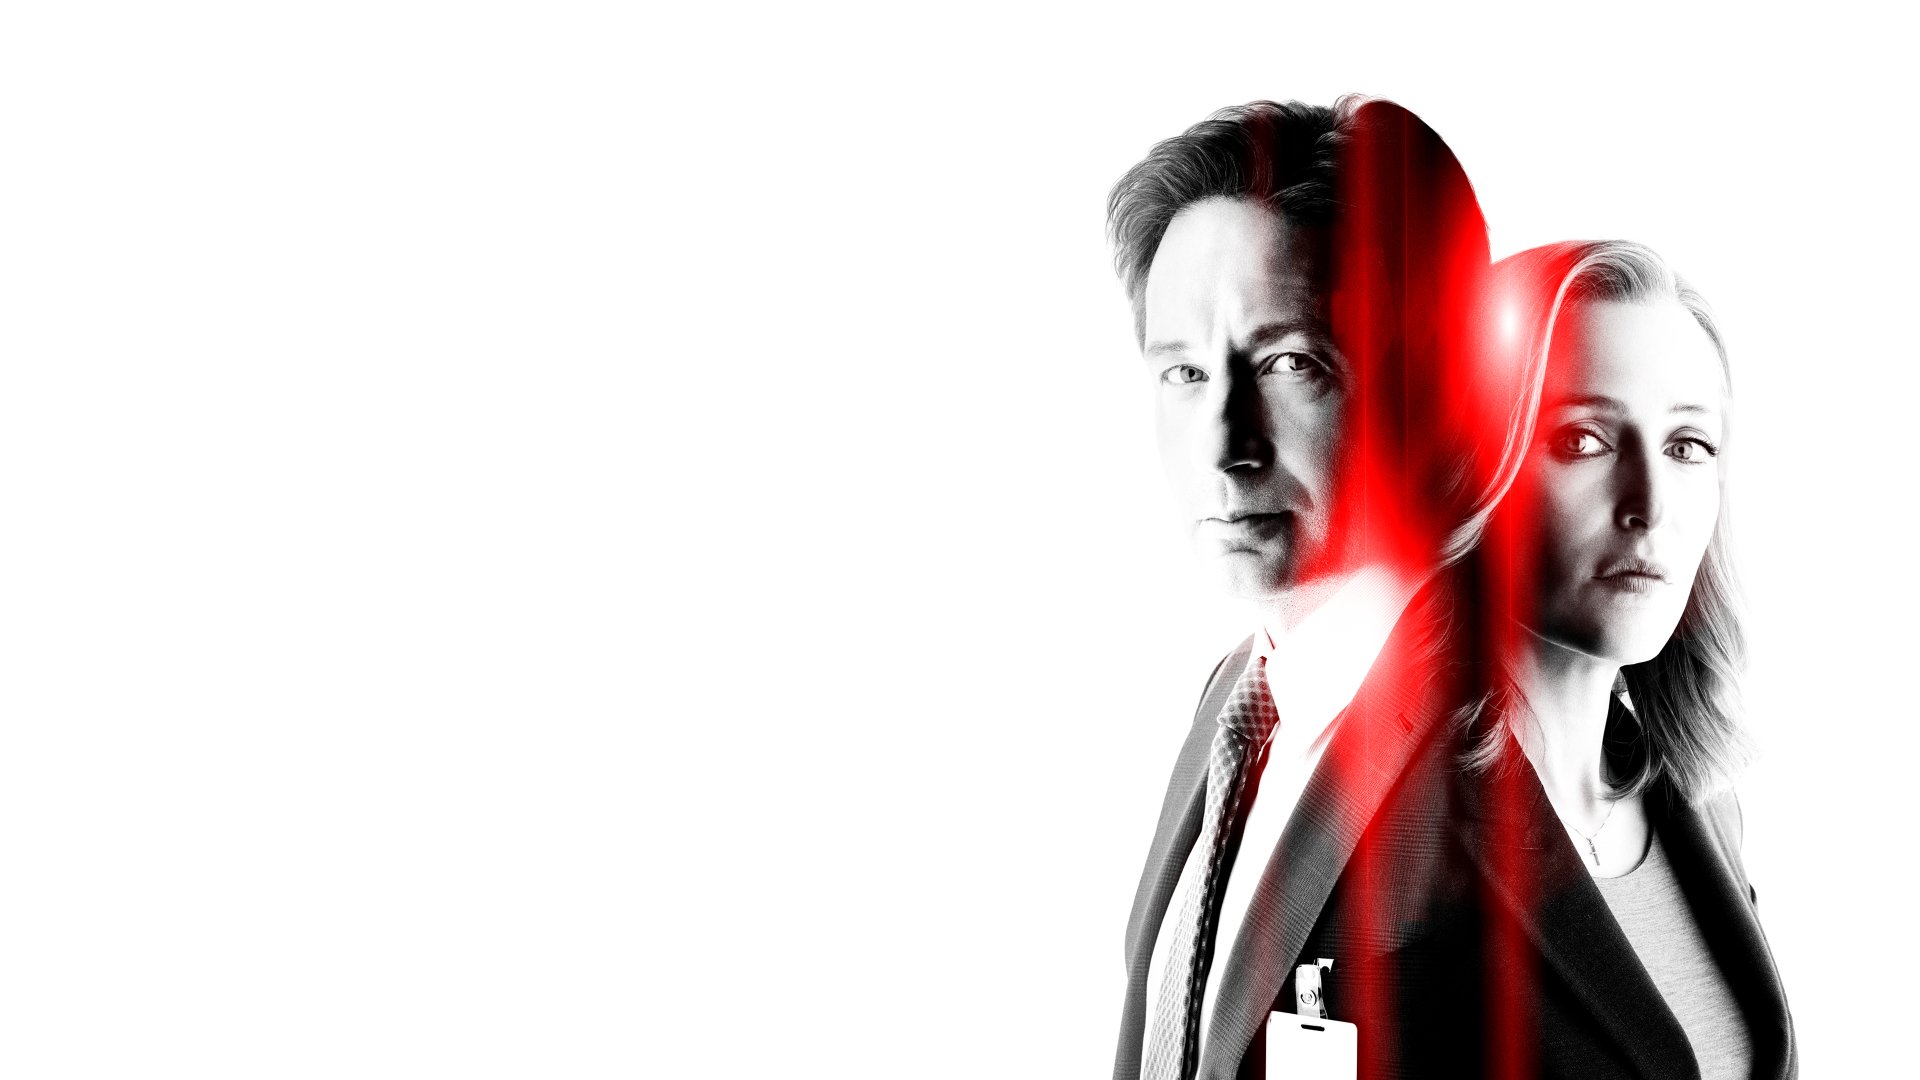 3840x2160 The X-Files Wallpaper Background Image. 